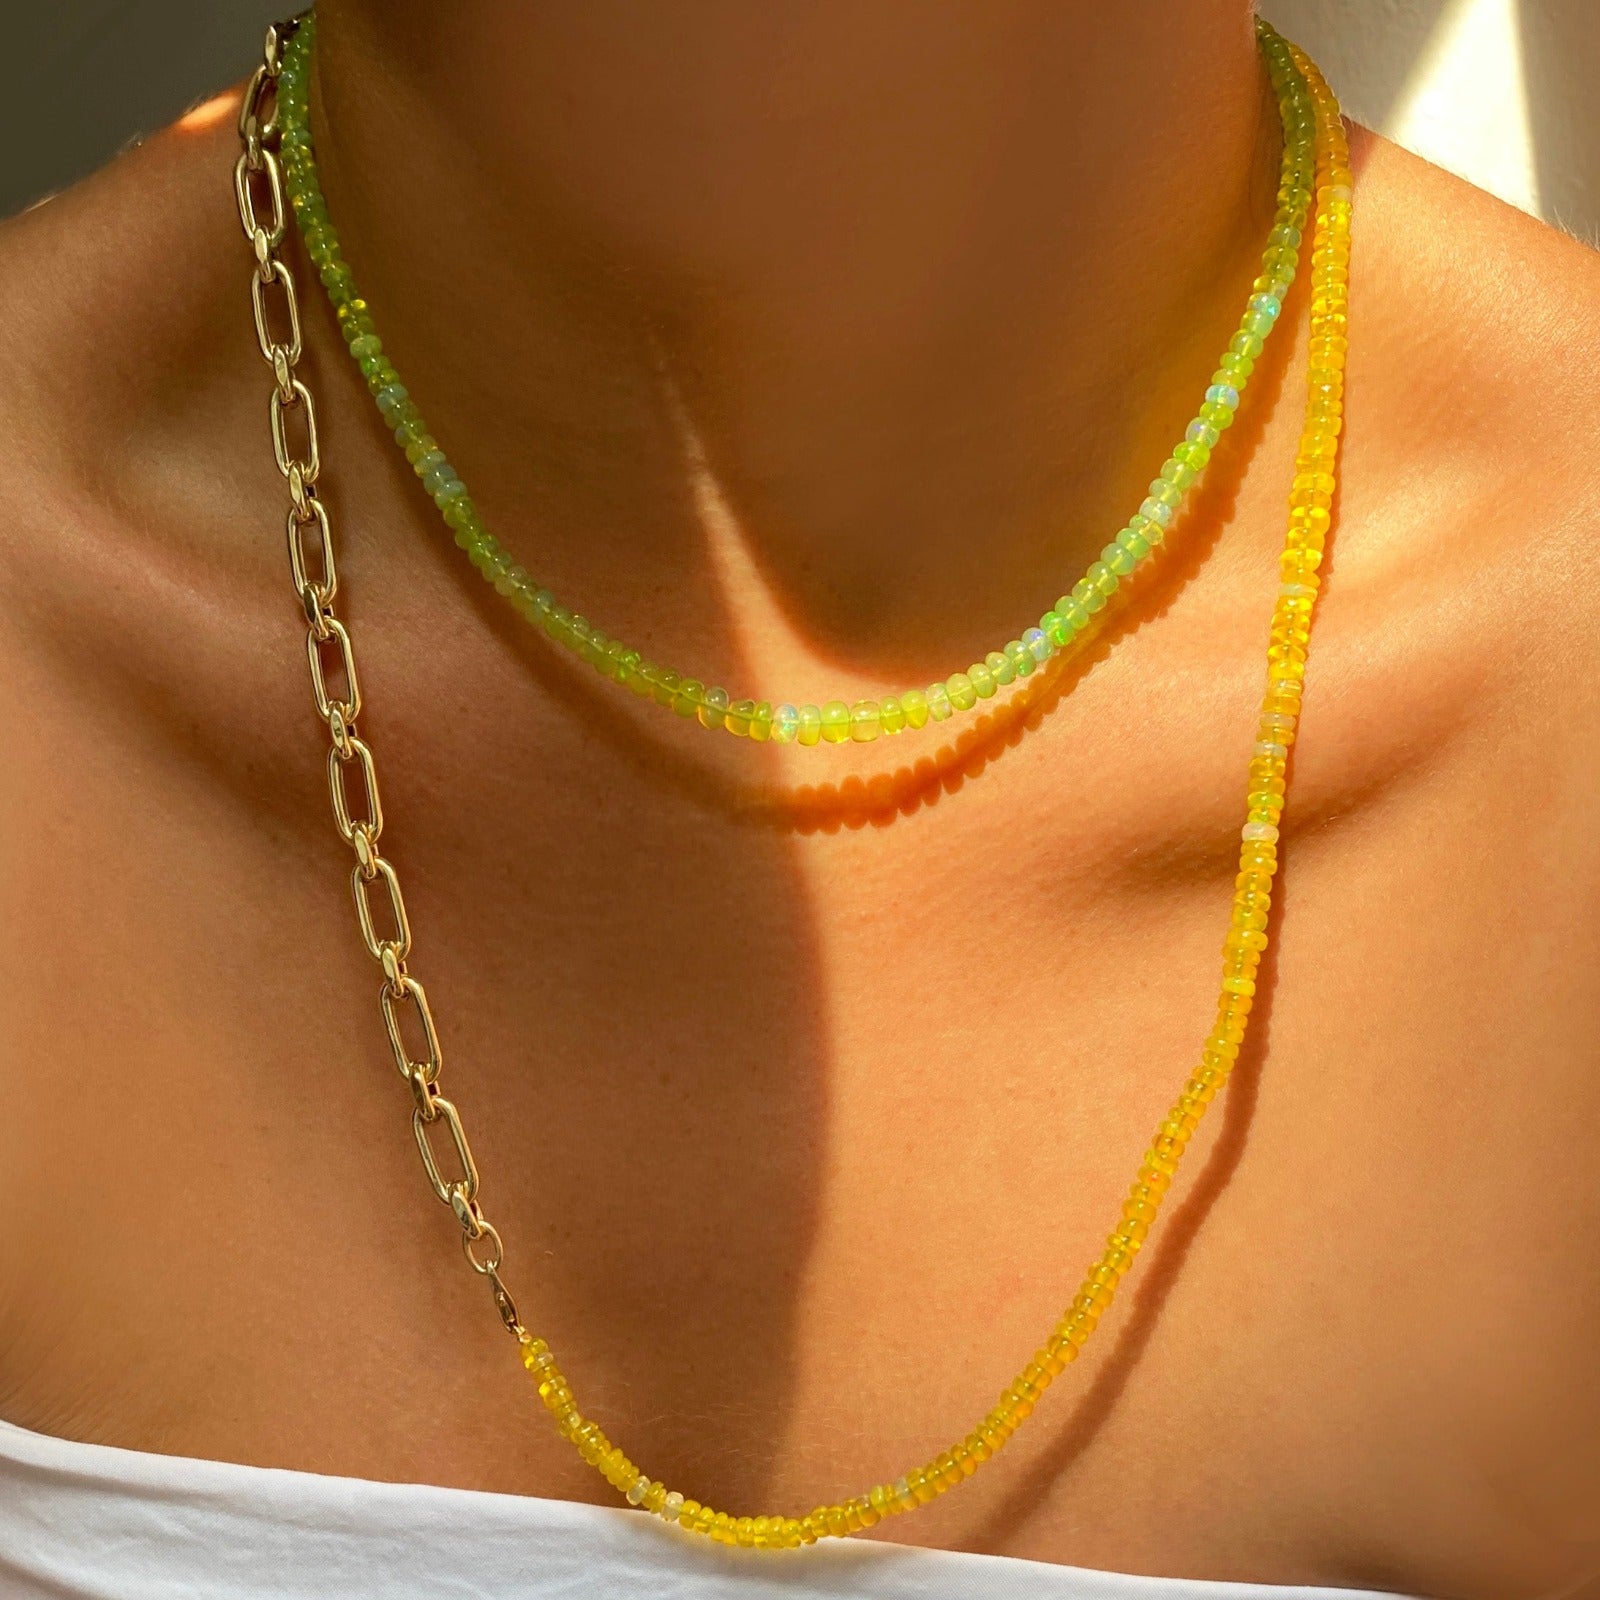 Shimmering beaded necklace made of smooth opal rondels in shades of yellow-green on a slim gold lobster clasp. Styled on a neck layered with the diamond cut link chain necklace.